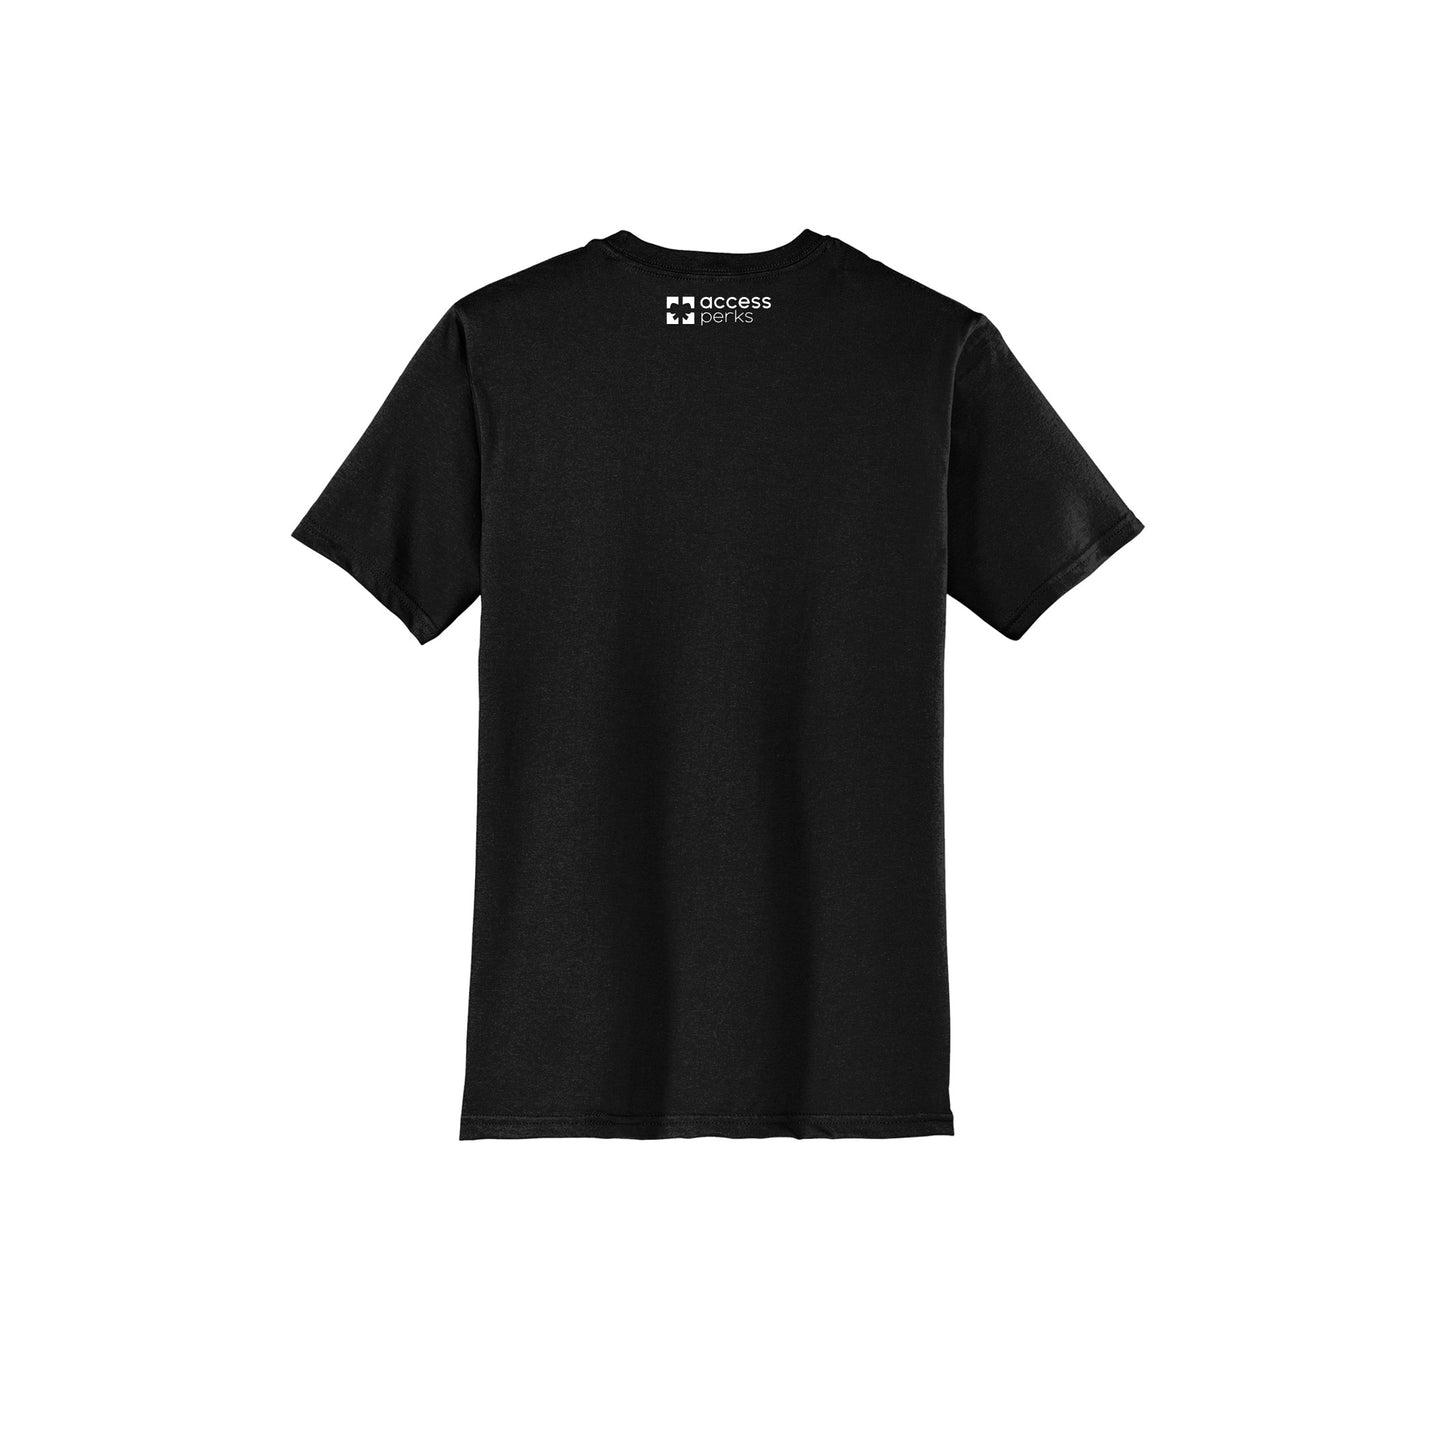 W2/19 For Those About To Apply | Black Short Sleeve T-Shirt